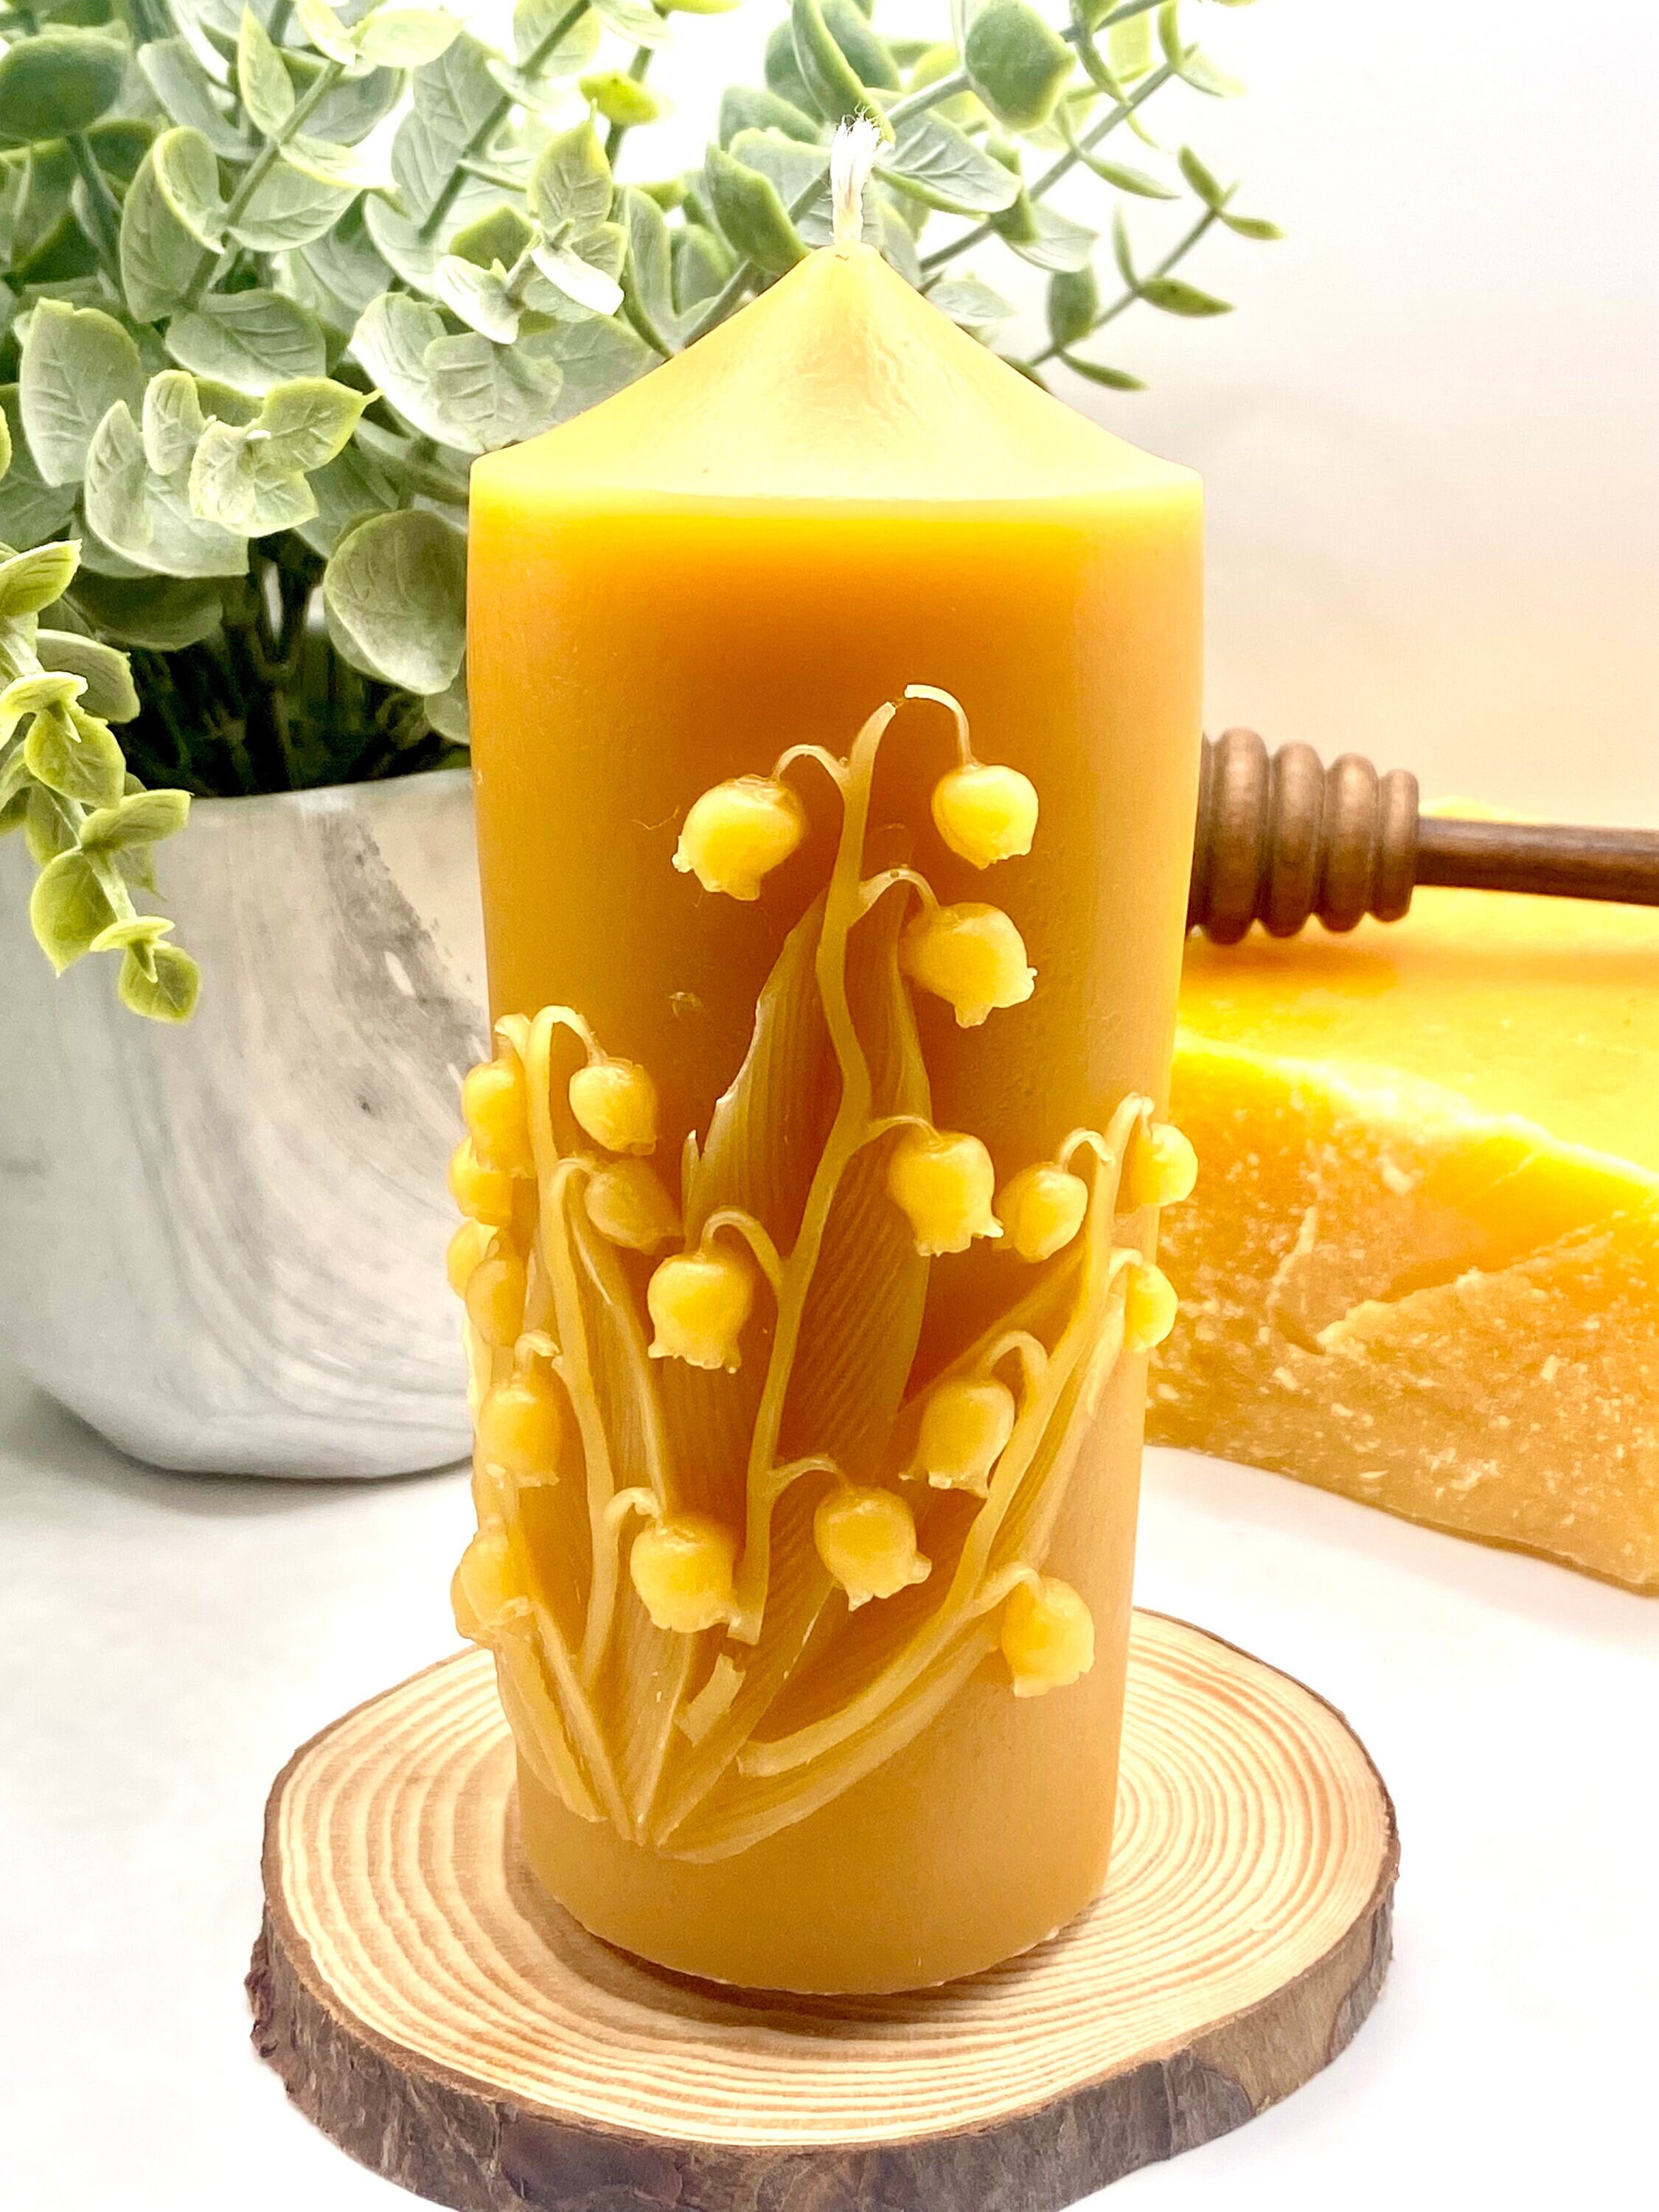 Pure Canadian Beeswax Candles handmade with LOVE in Revelstoke BC